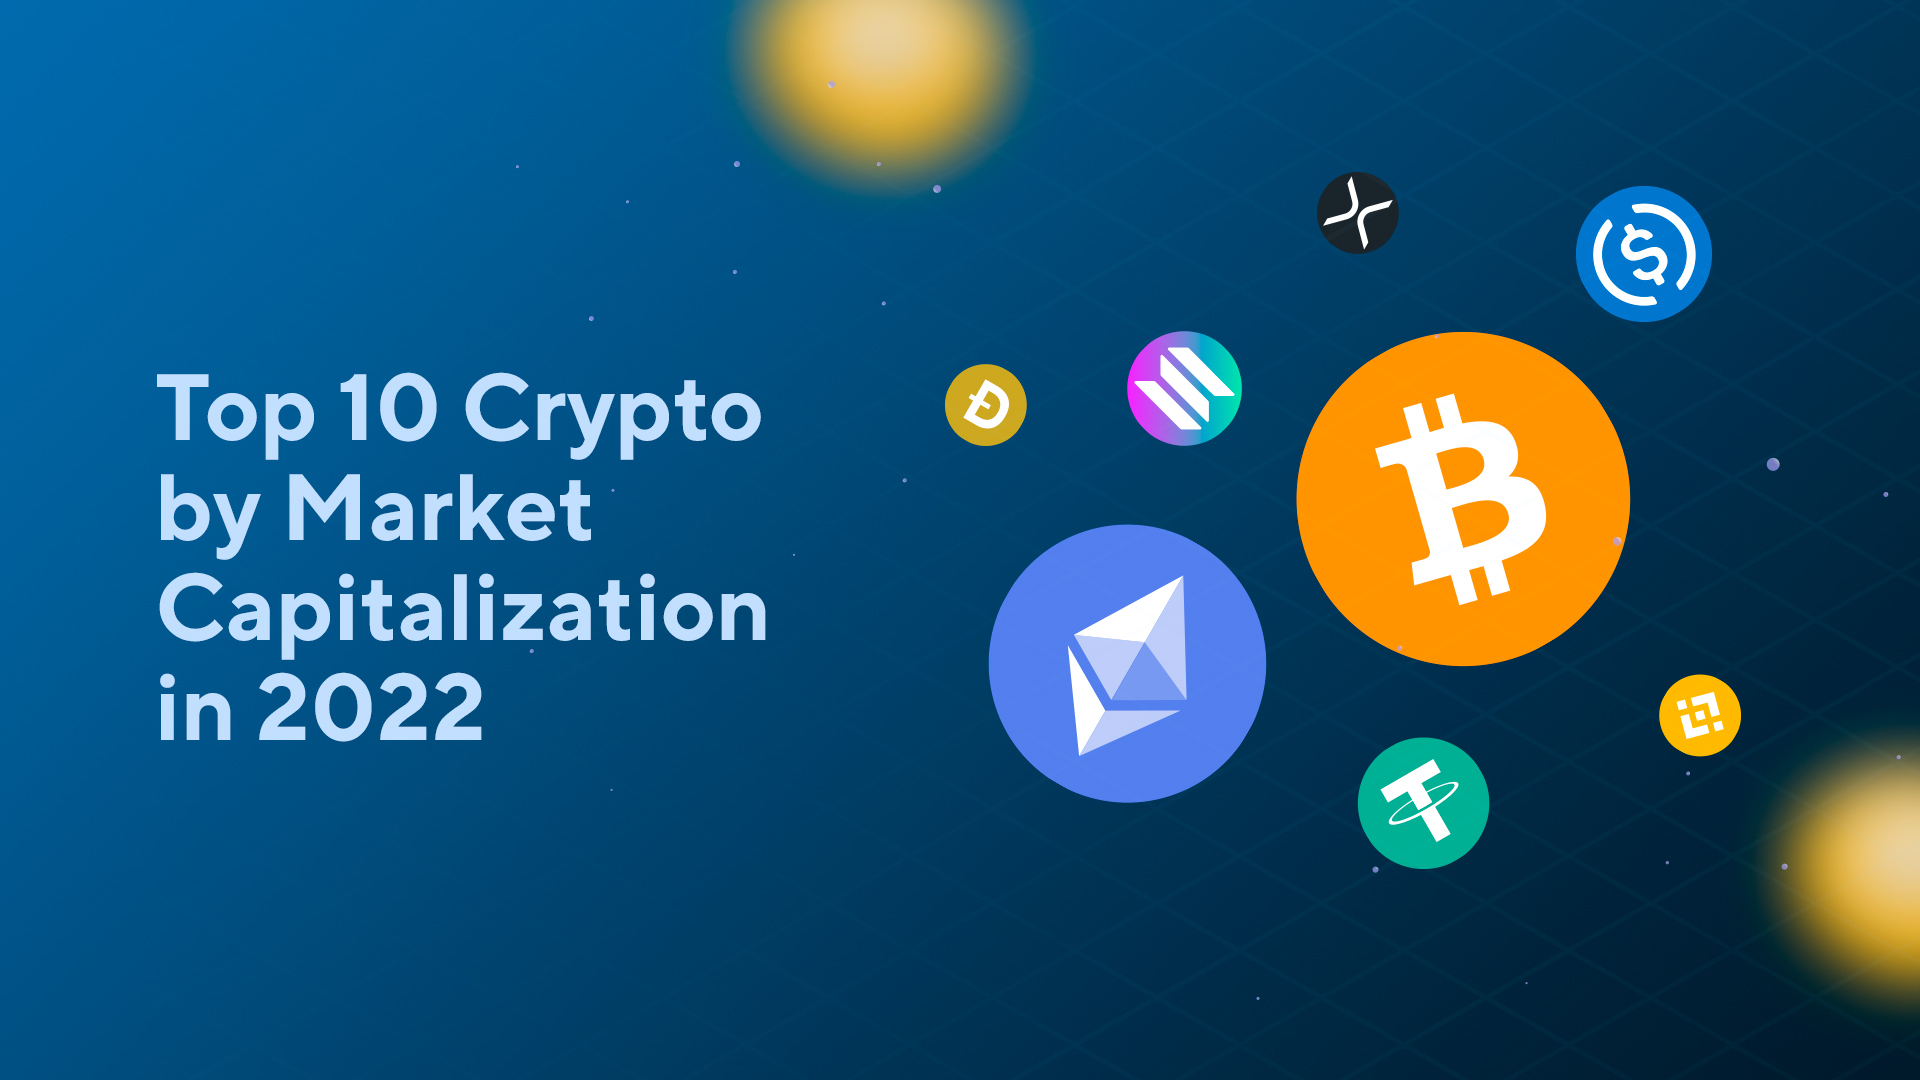 Top 10 Cryptocurrencies by Market Capitalization in 2022